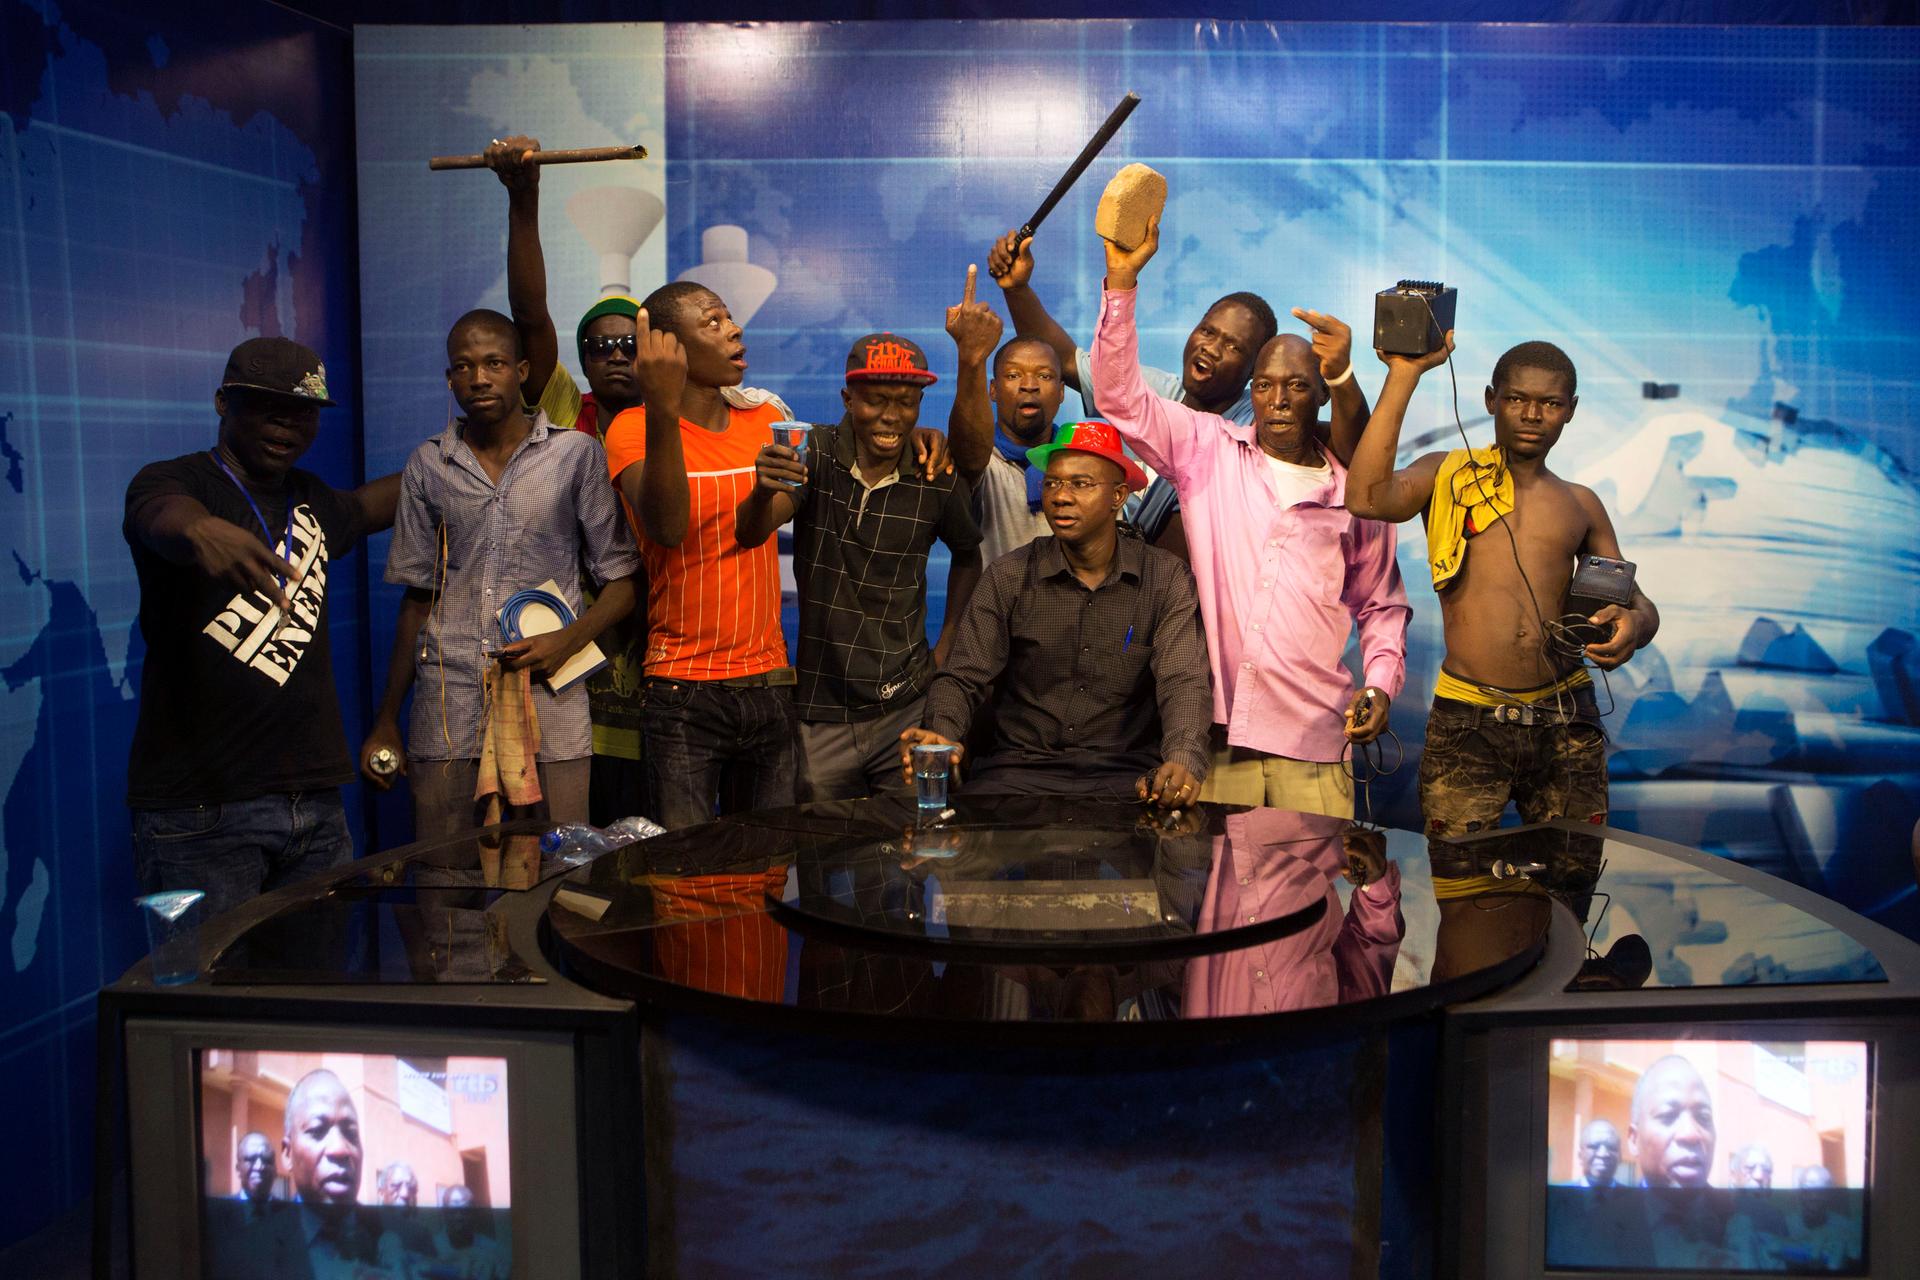 Anti-government protesters at a TV station in Burkina Faso